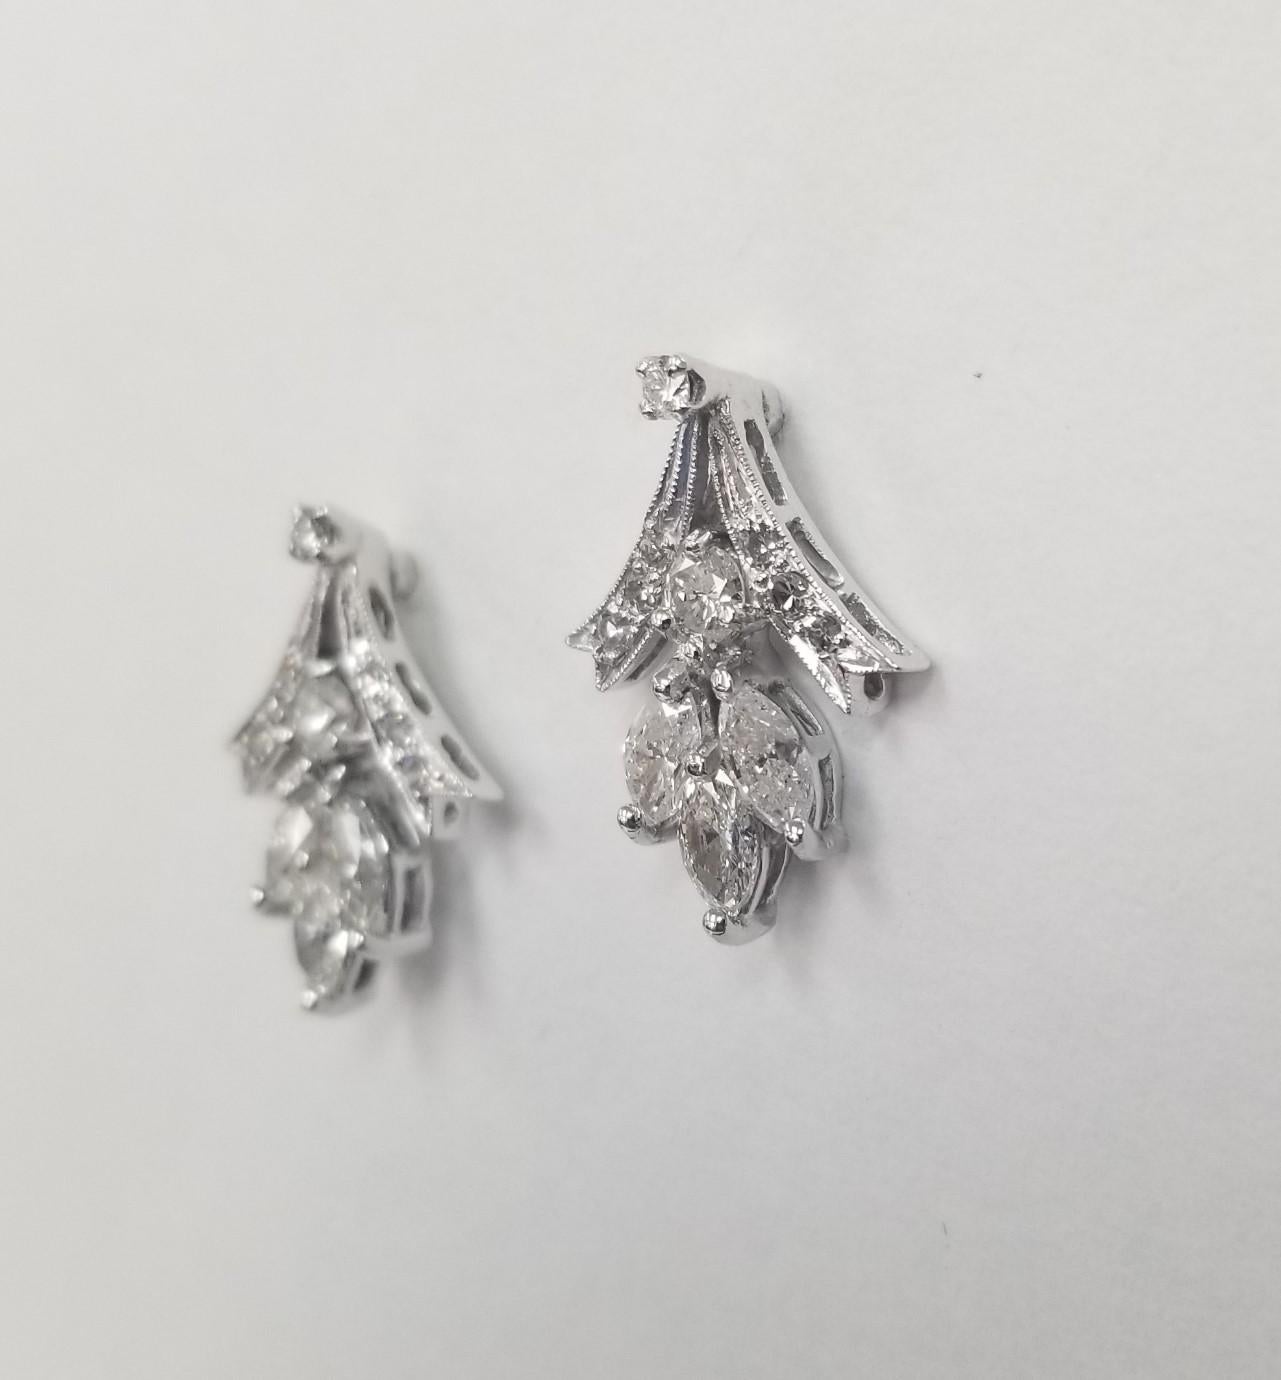 Vintage 1950's 14k White Gold Round and Marquise Cut Diamond Earrings
SPECIFICATIONS:
MAIN STONE:16 PCS single cut round diamonds 
SIDE STONE:6 PCS Marquise Cut
CARAT TOTAL WEIGHT:APPROXIMATELY 2.26